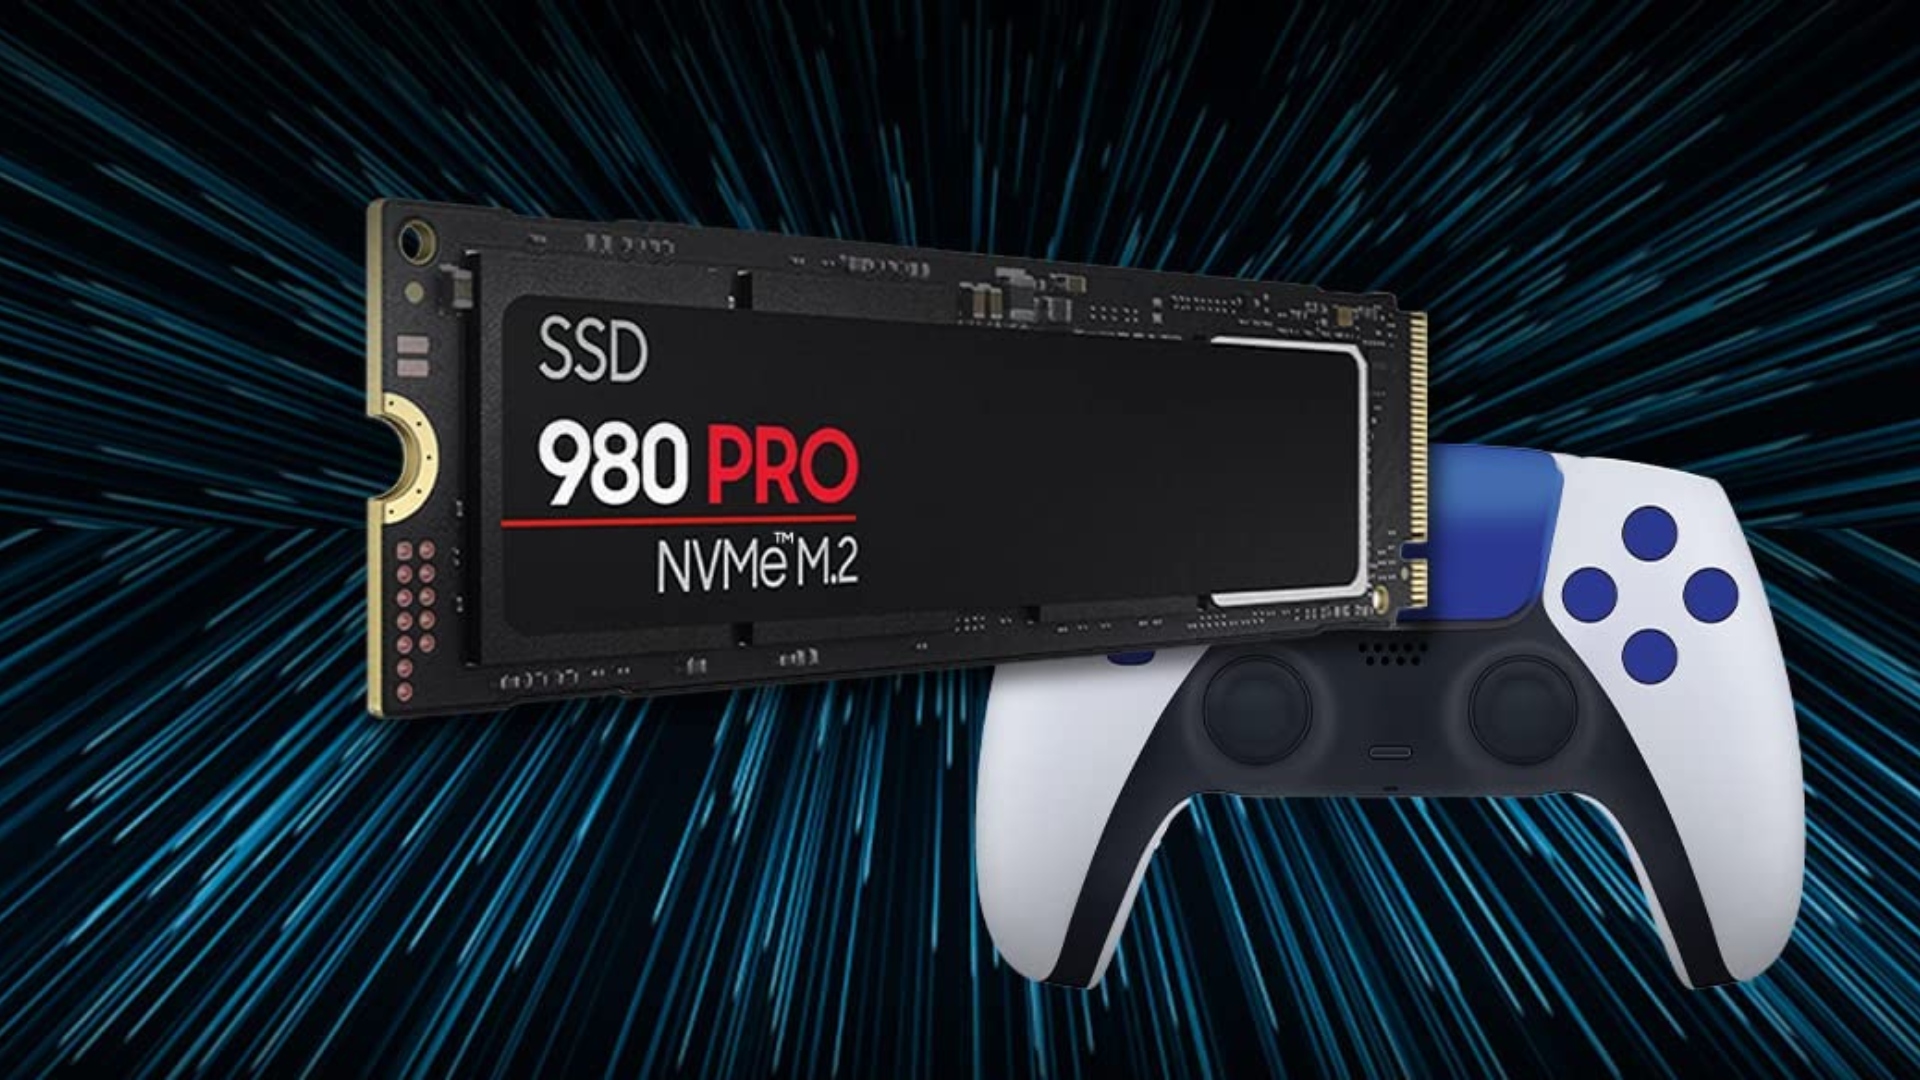 Samsung 980 Pro NVMe SSD $200 cheaper this Black Friday